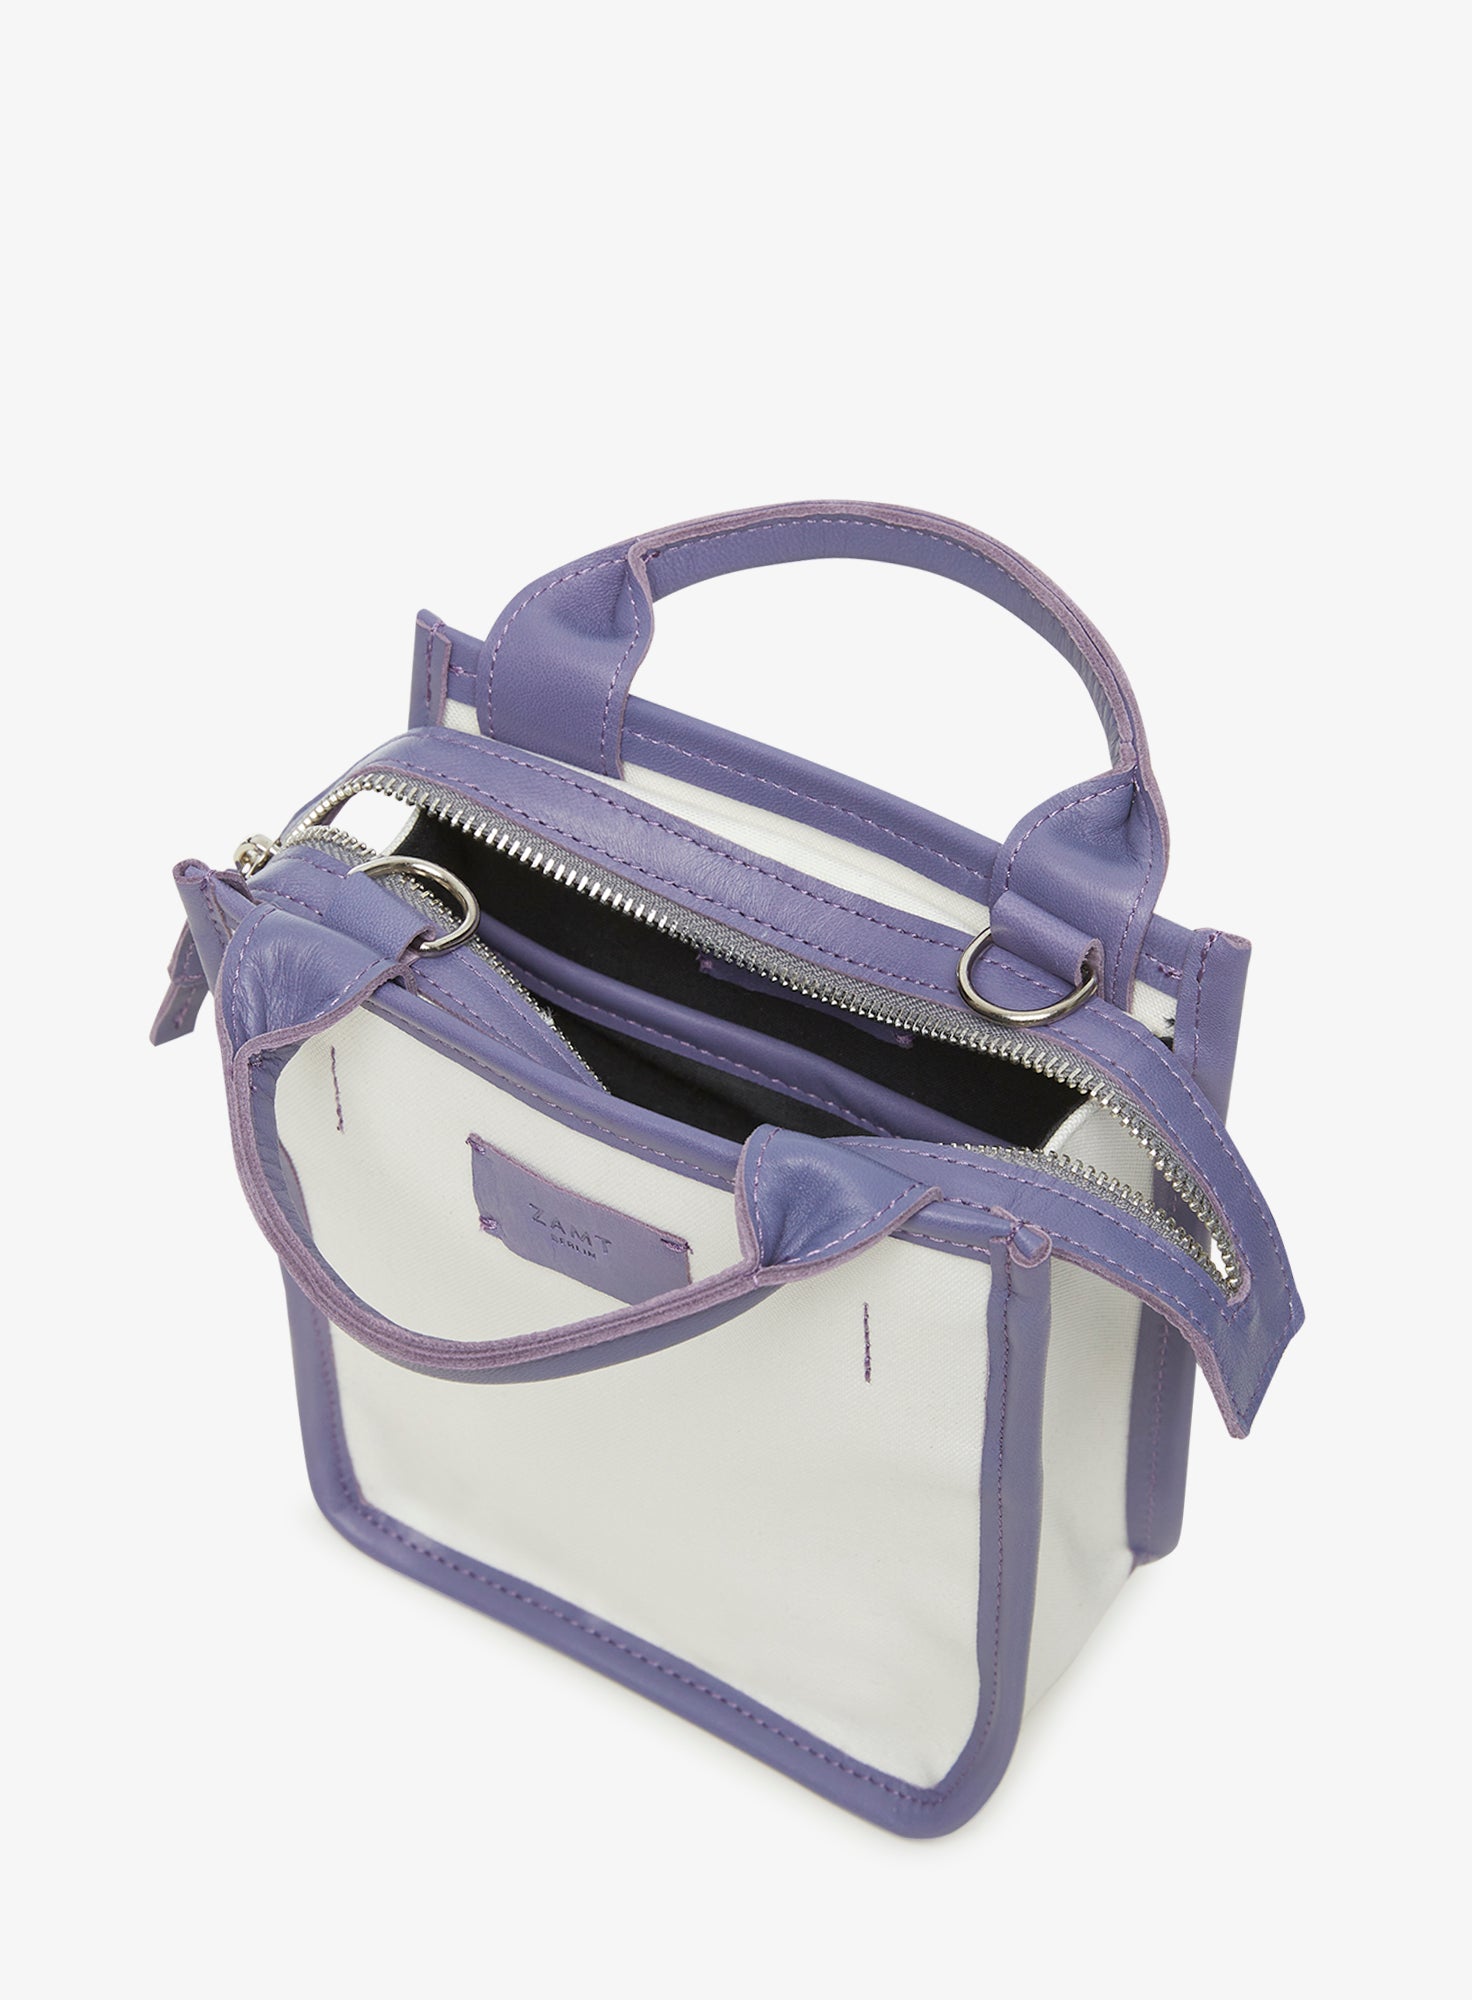 CROSSBODY_BAG_FINCH_CANVAS_LAVENDER_Designed_in_Berlin_Made_to_last_Handmade_in_Poland.